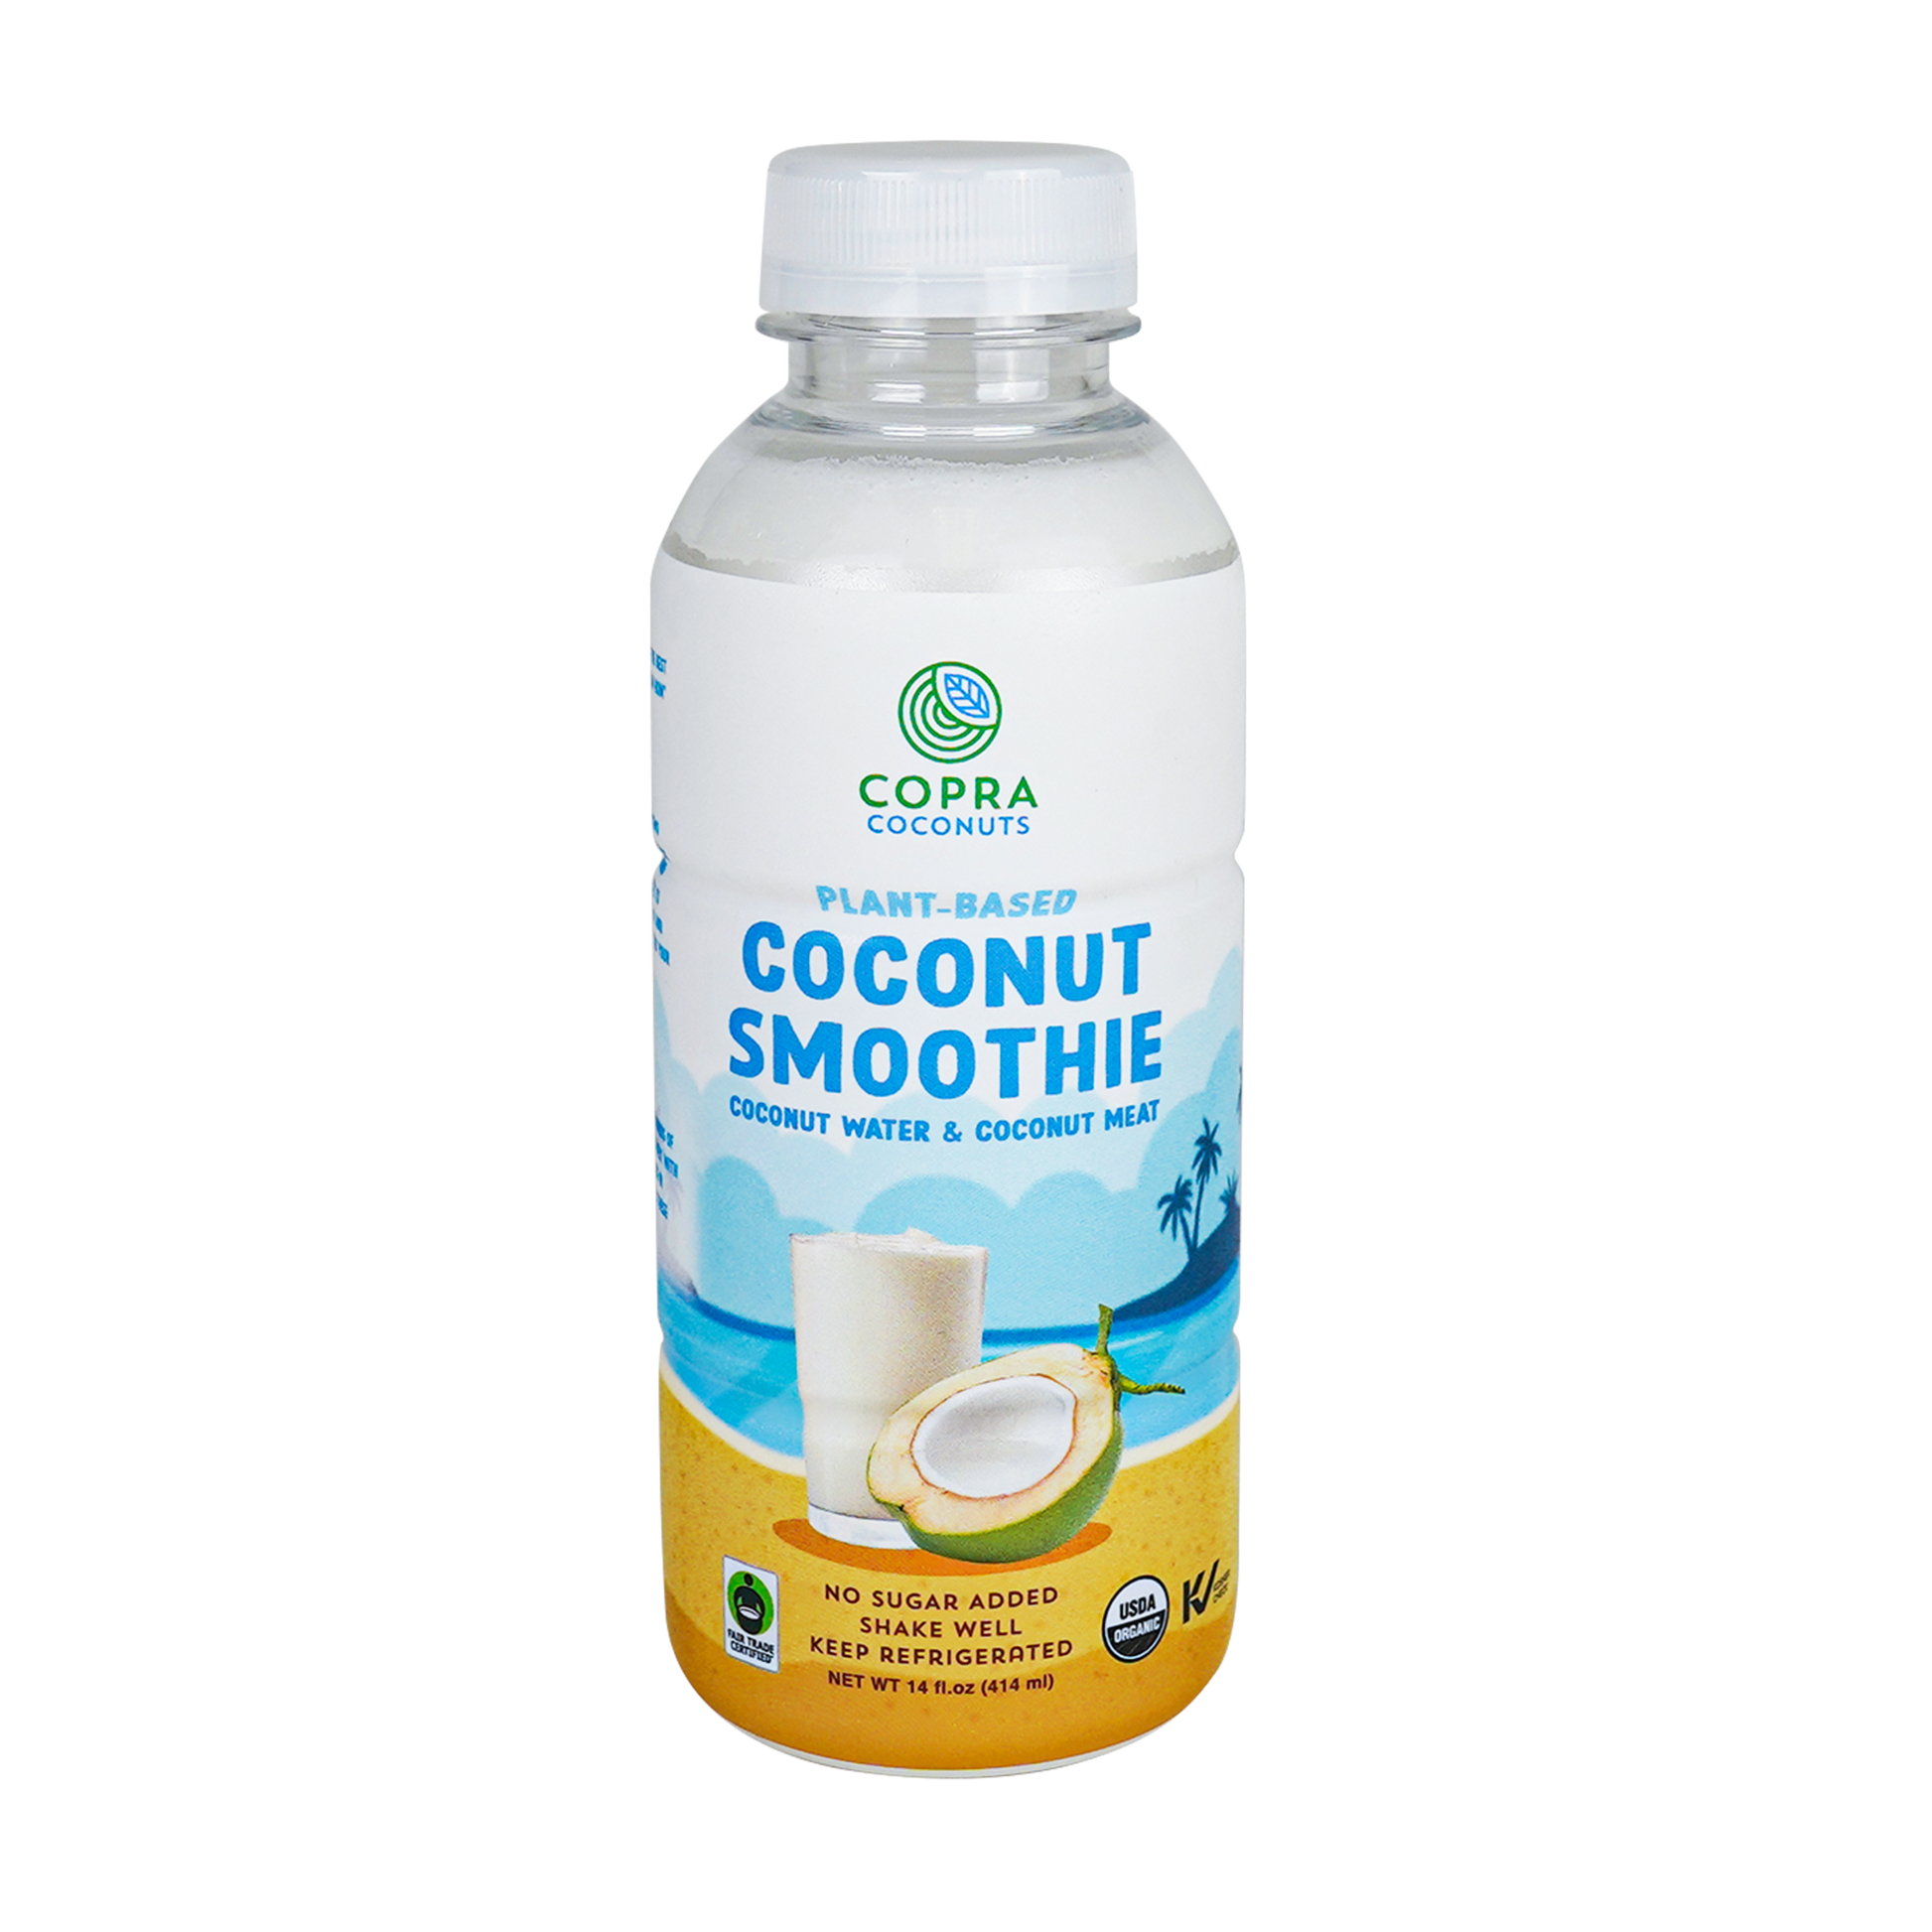 Bottle of Organic Coconut Smoothie by Copra Coconuts